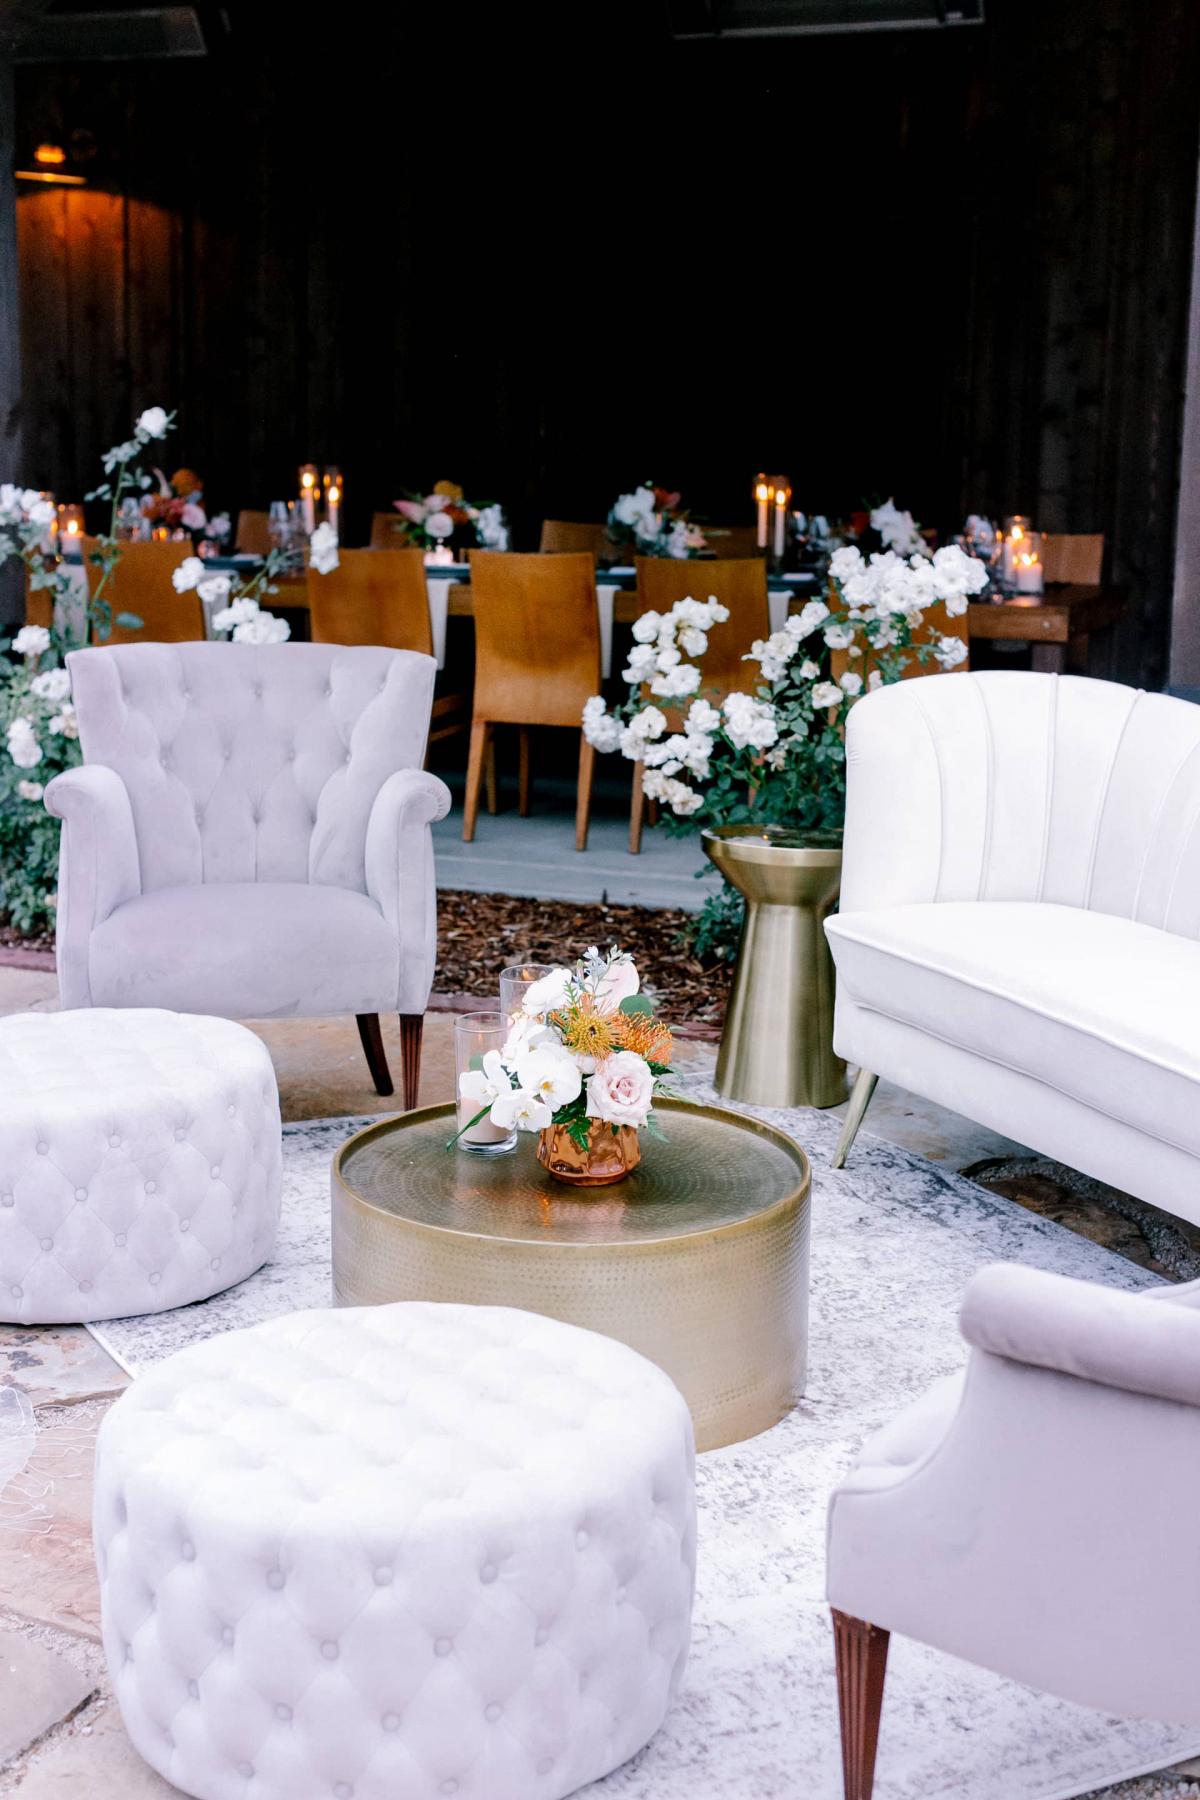 Outdoor Setting with Couch, 2 Chairs, Coffee Table and Poofs with Reception Table Behind for Mika & James's Wedding